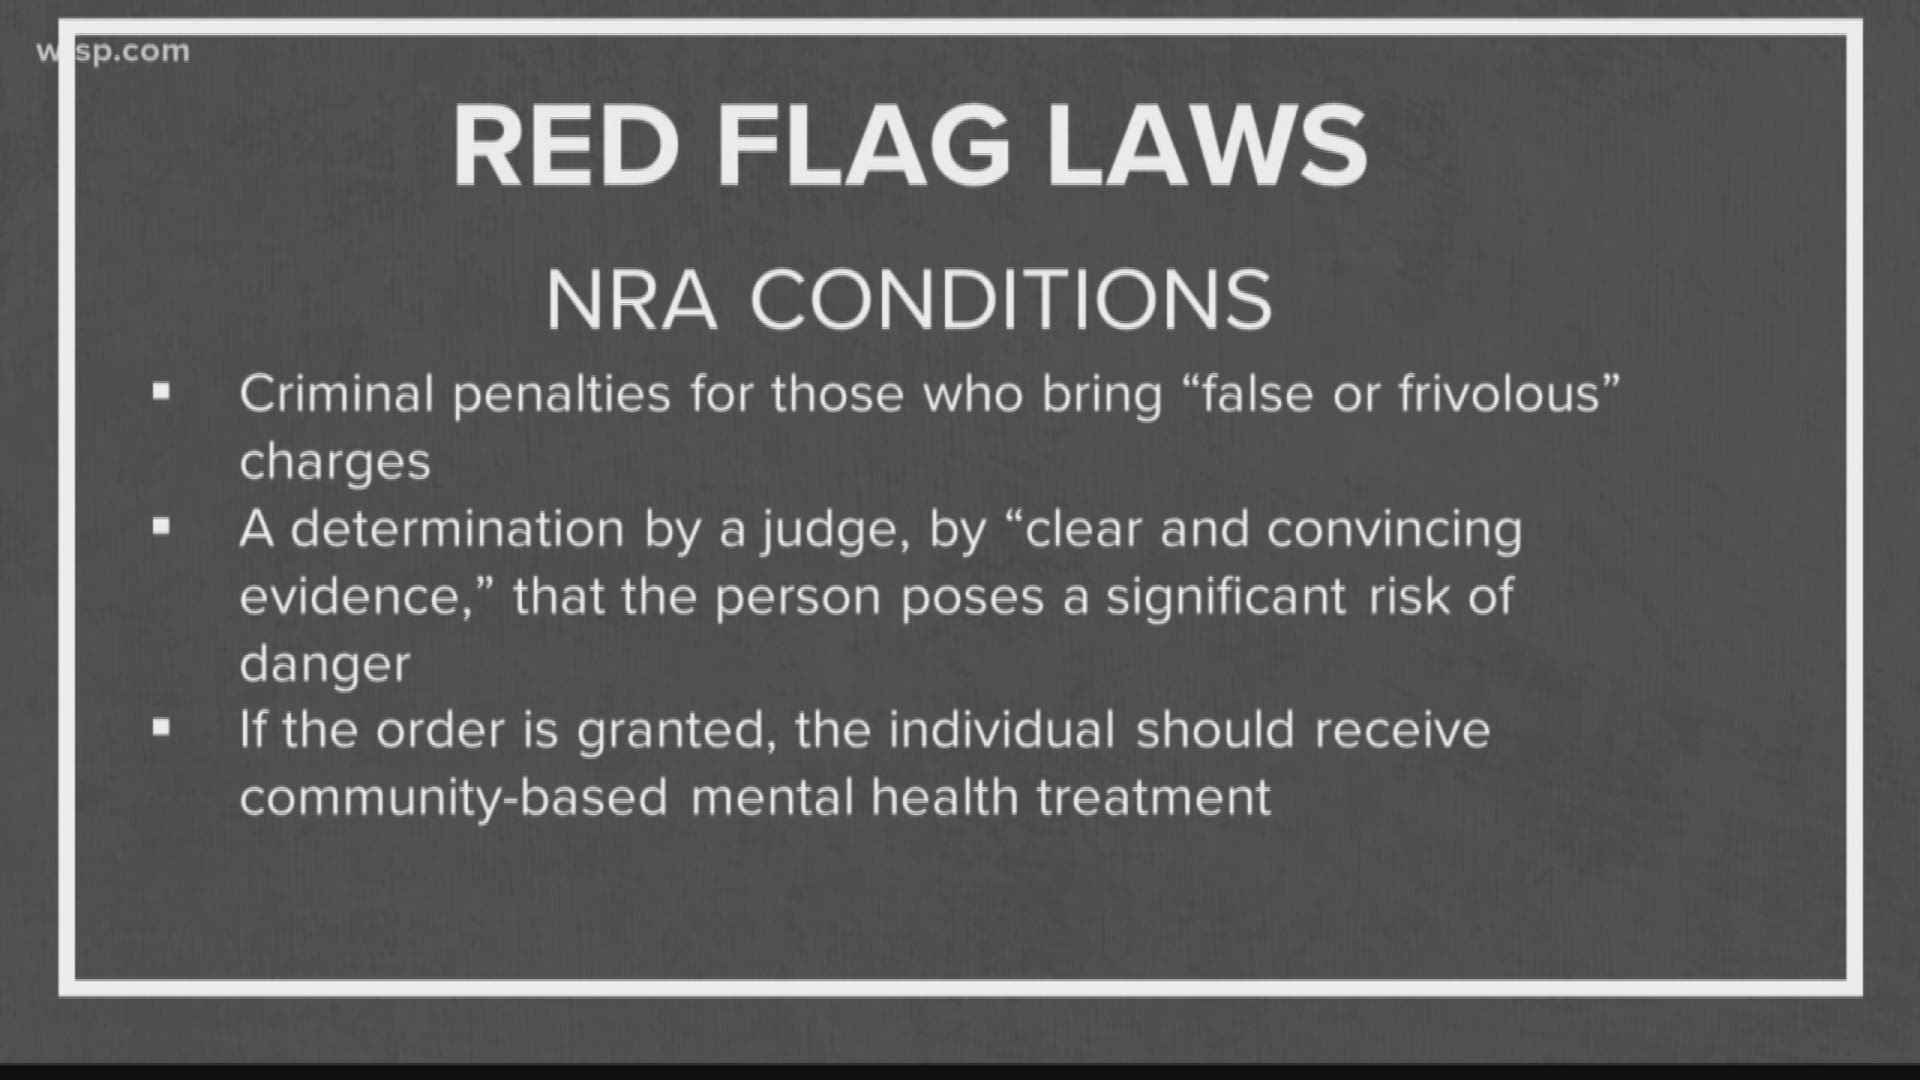 Mass shootings in El Paso, Texas, and Dayton, Ohio, have reignited the debate over so-called "red flag laws" across the country.

Florida already has a "red flag law" on the books as part of the Marjory Stoneman Douglas High School Public Safety Act passed by lawmakers after the Parkland shooting. But a bill filed this week would expand the scope of Florida's law to allow family members to petition courts for risk protection orders.